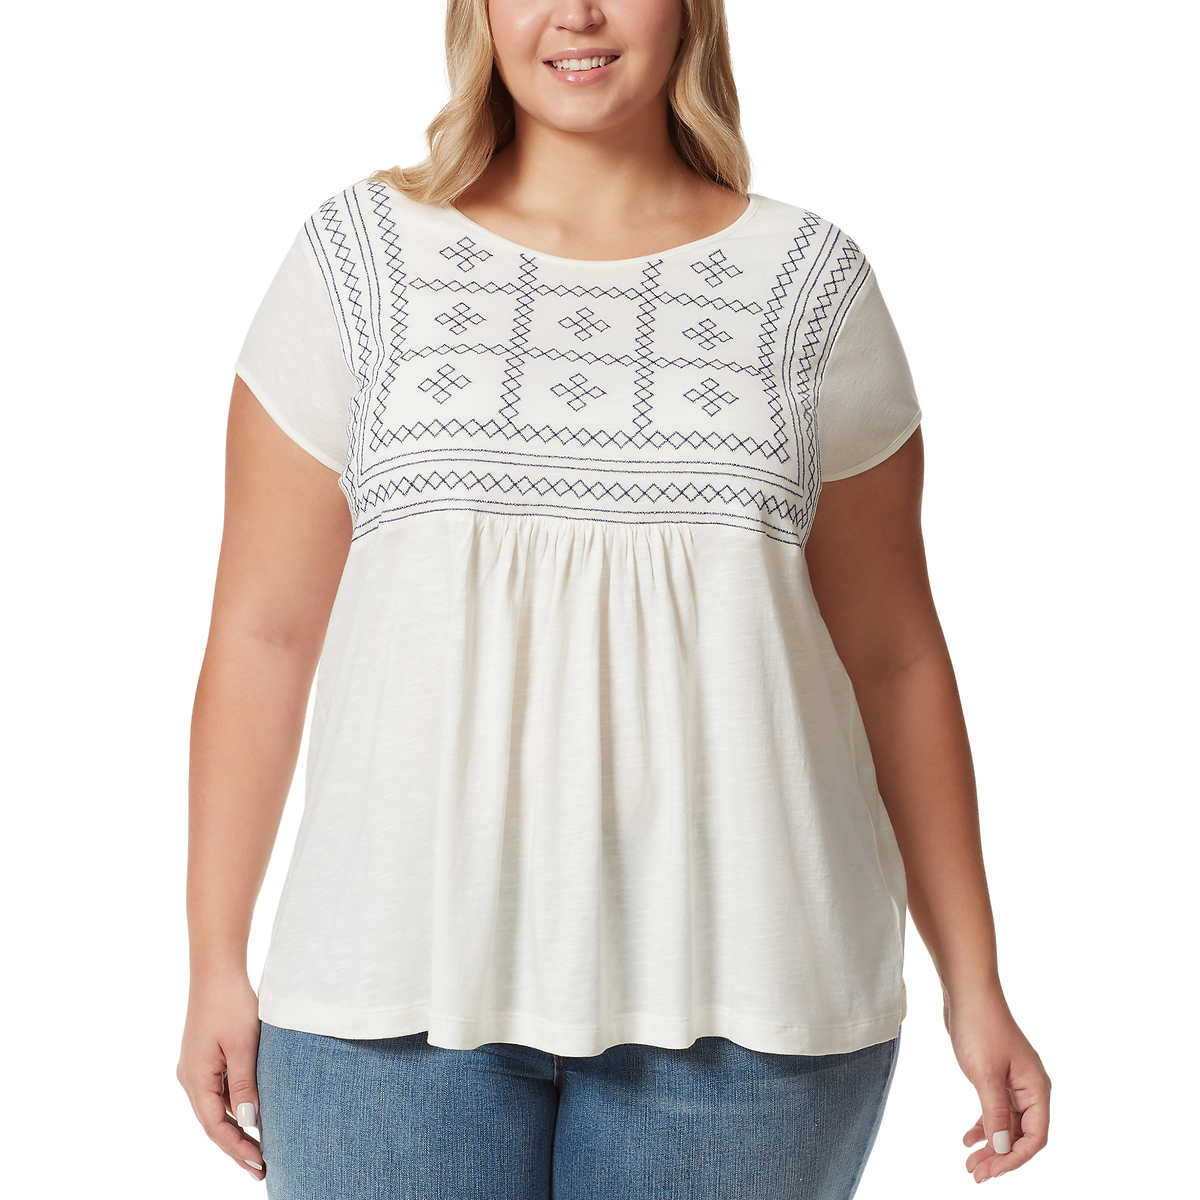 Gloria Vanderbilt Women's Plus Embroidered Relaxed Fit Tee Tunic Top